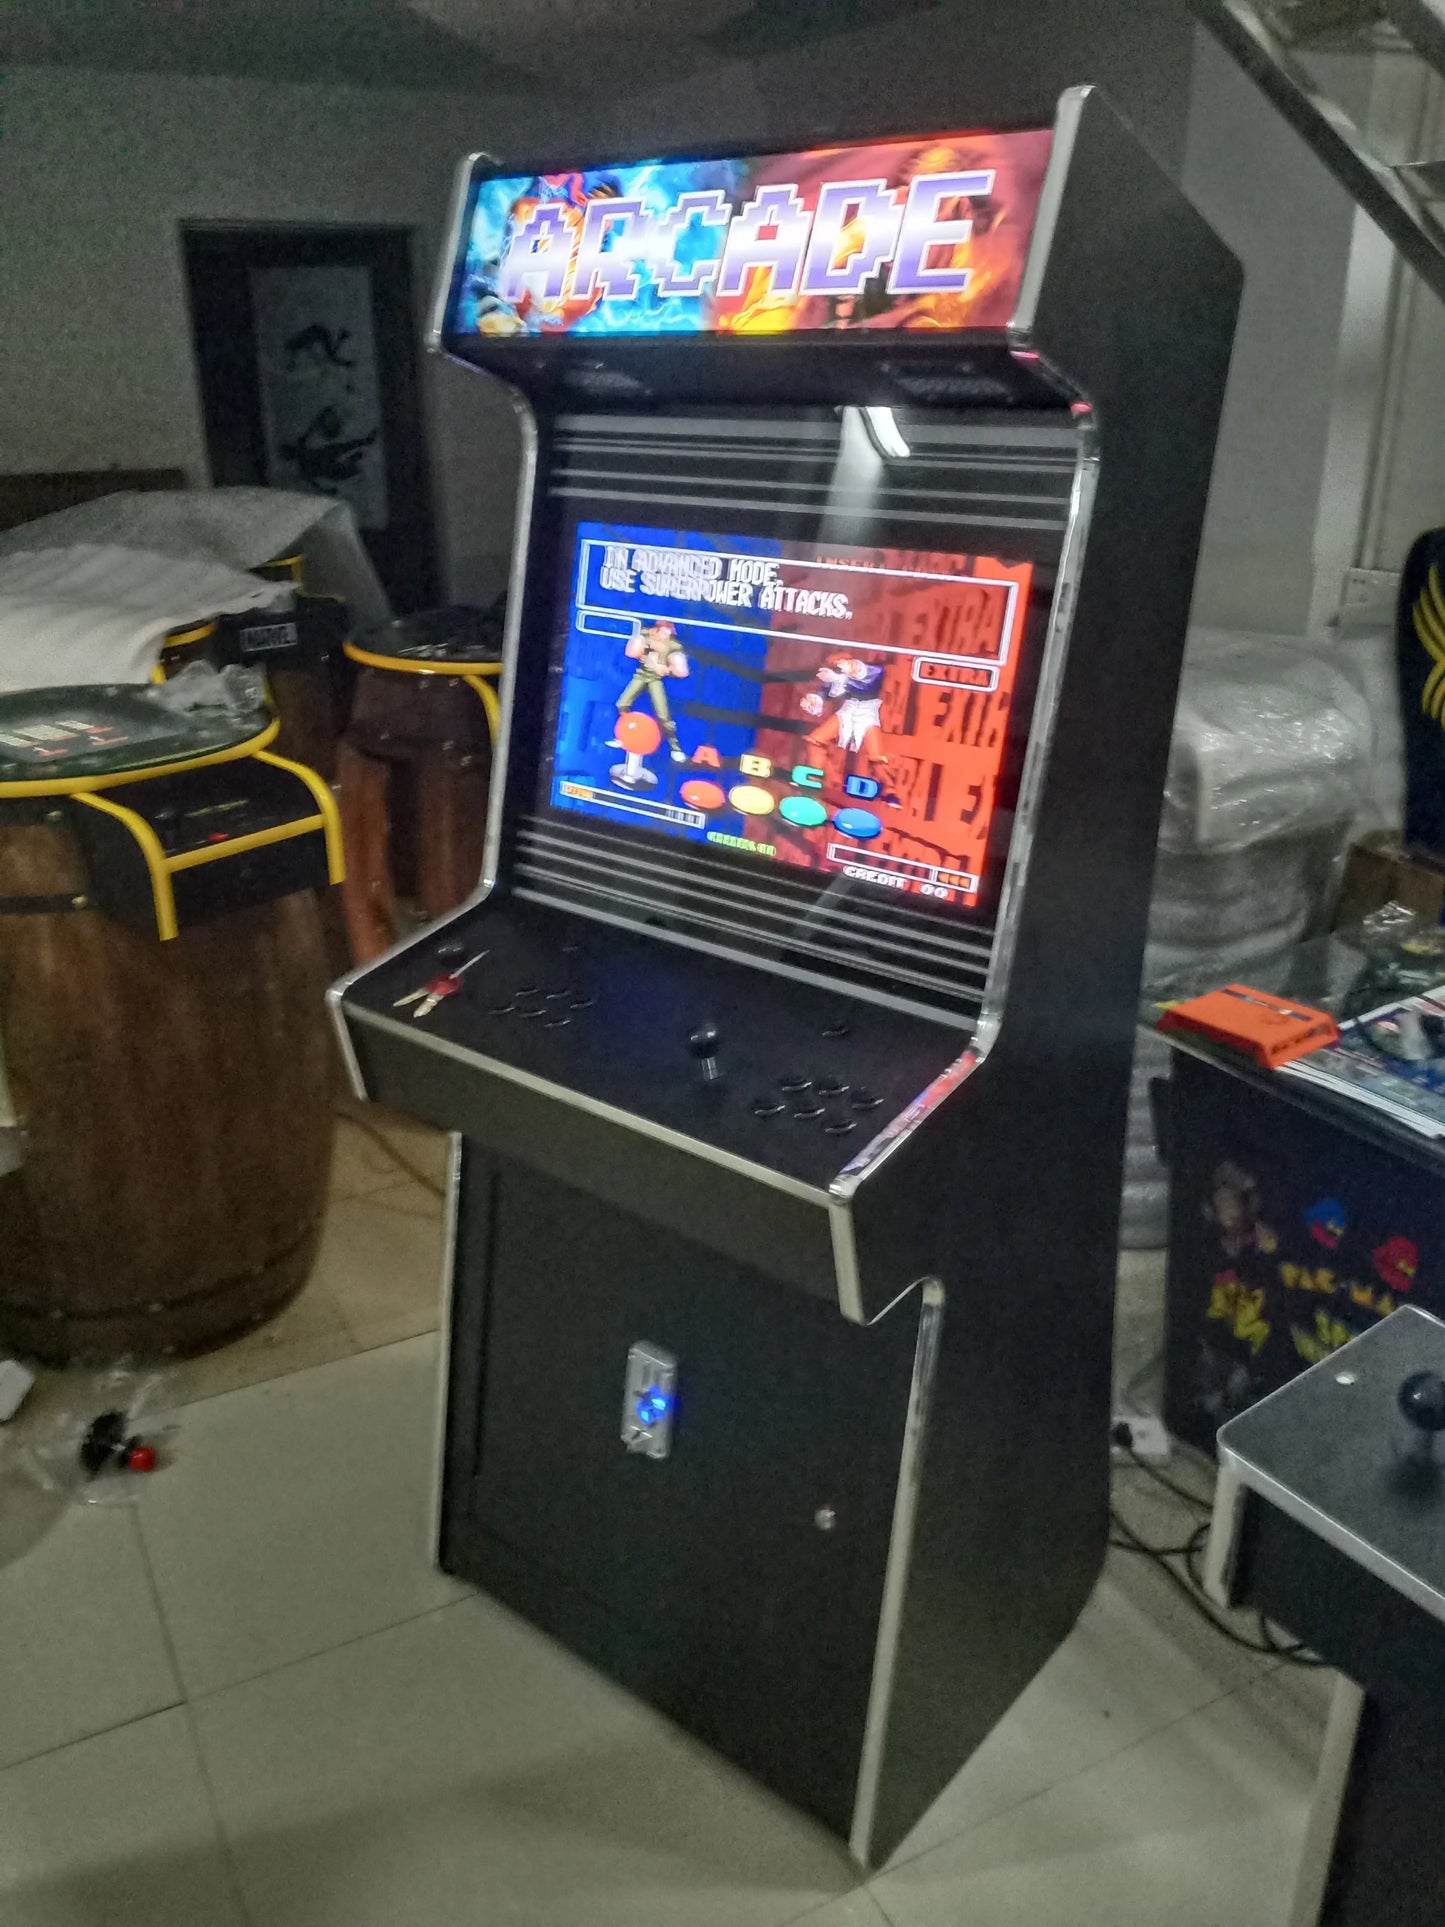 Street-fighter-Arcade-Stand-Wooden-Cabinet-Coin-Operated-Arcade-3188-In-1-pandoras-box-9D-Game-Machine-Tomy-Arcade